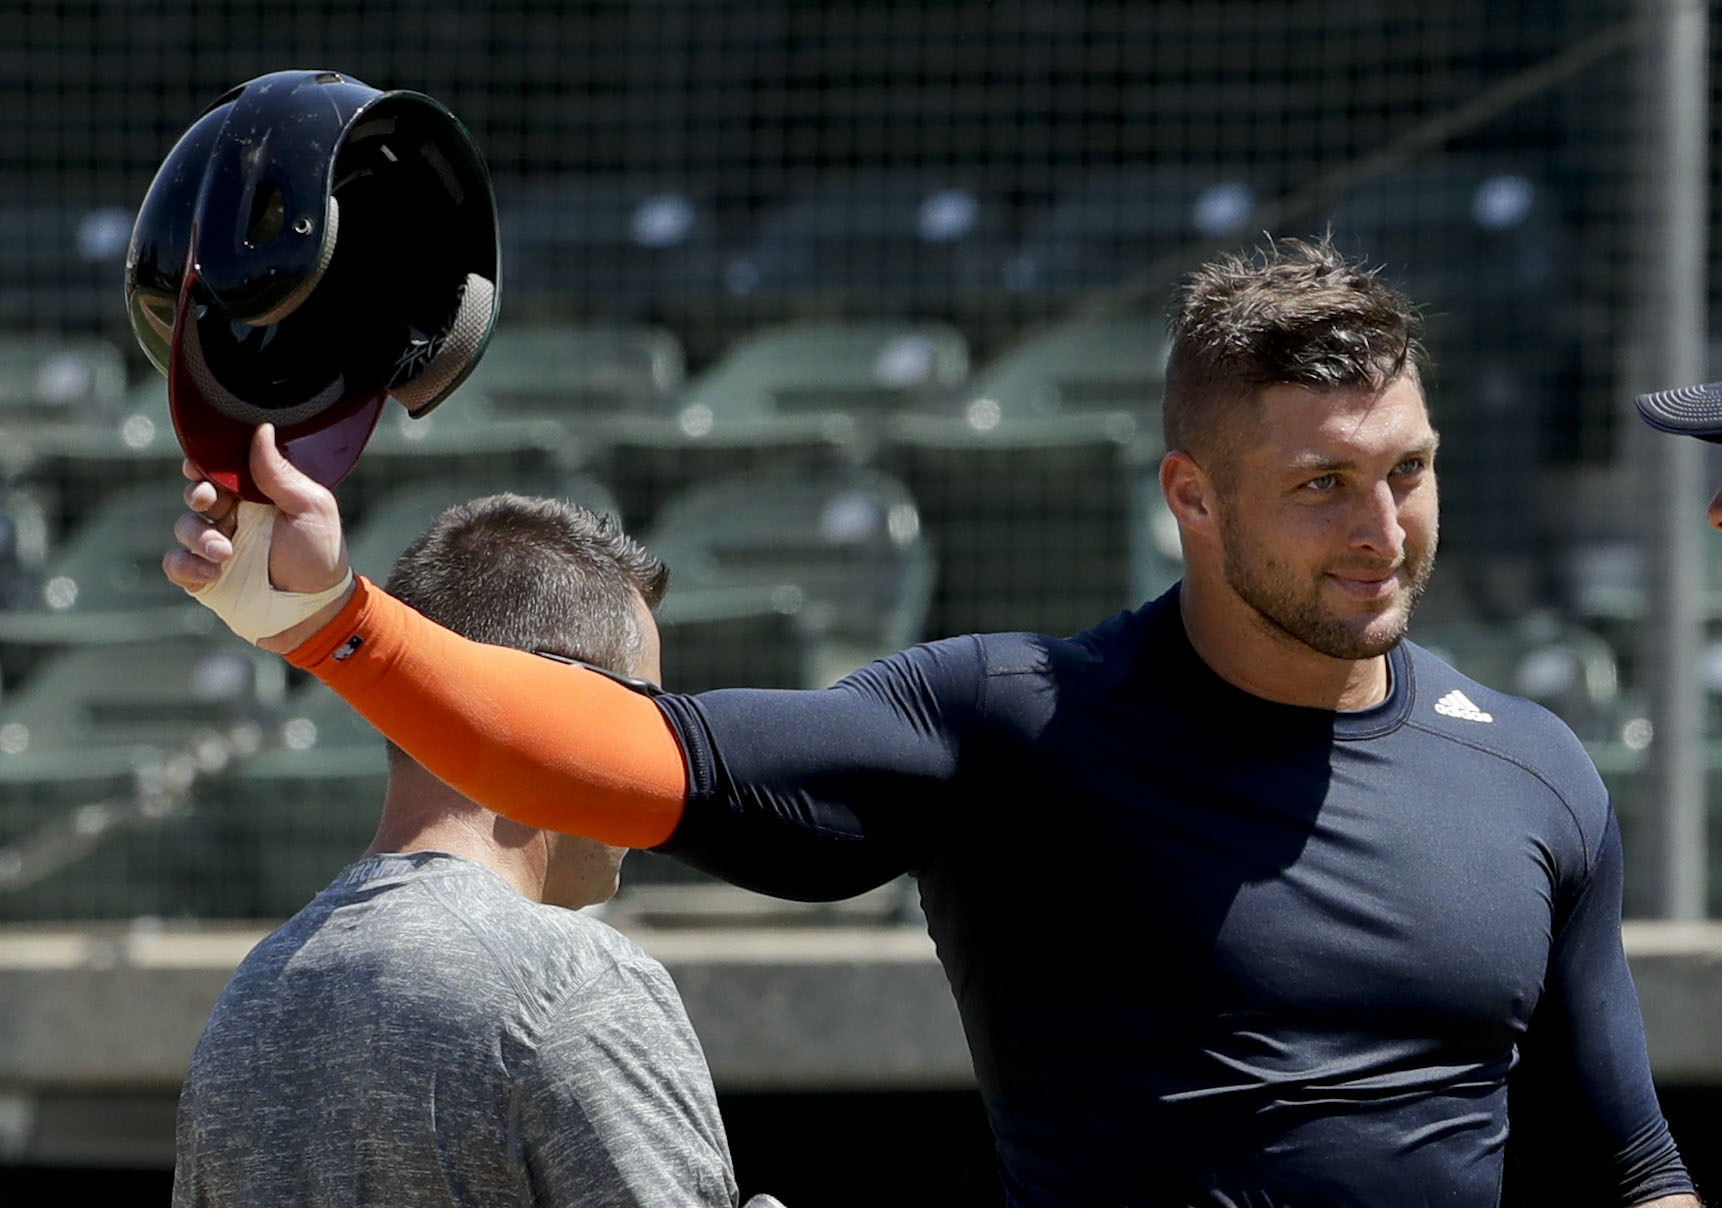 Things That People Do Not Know about Tim Tebow’s Baseball Career